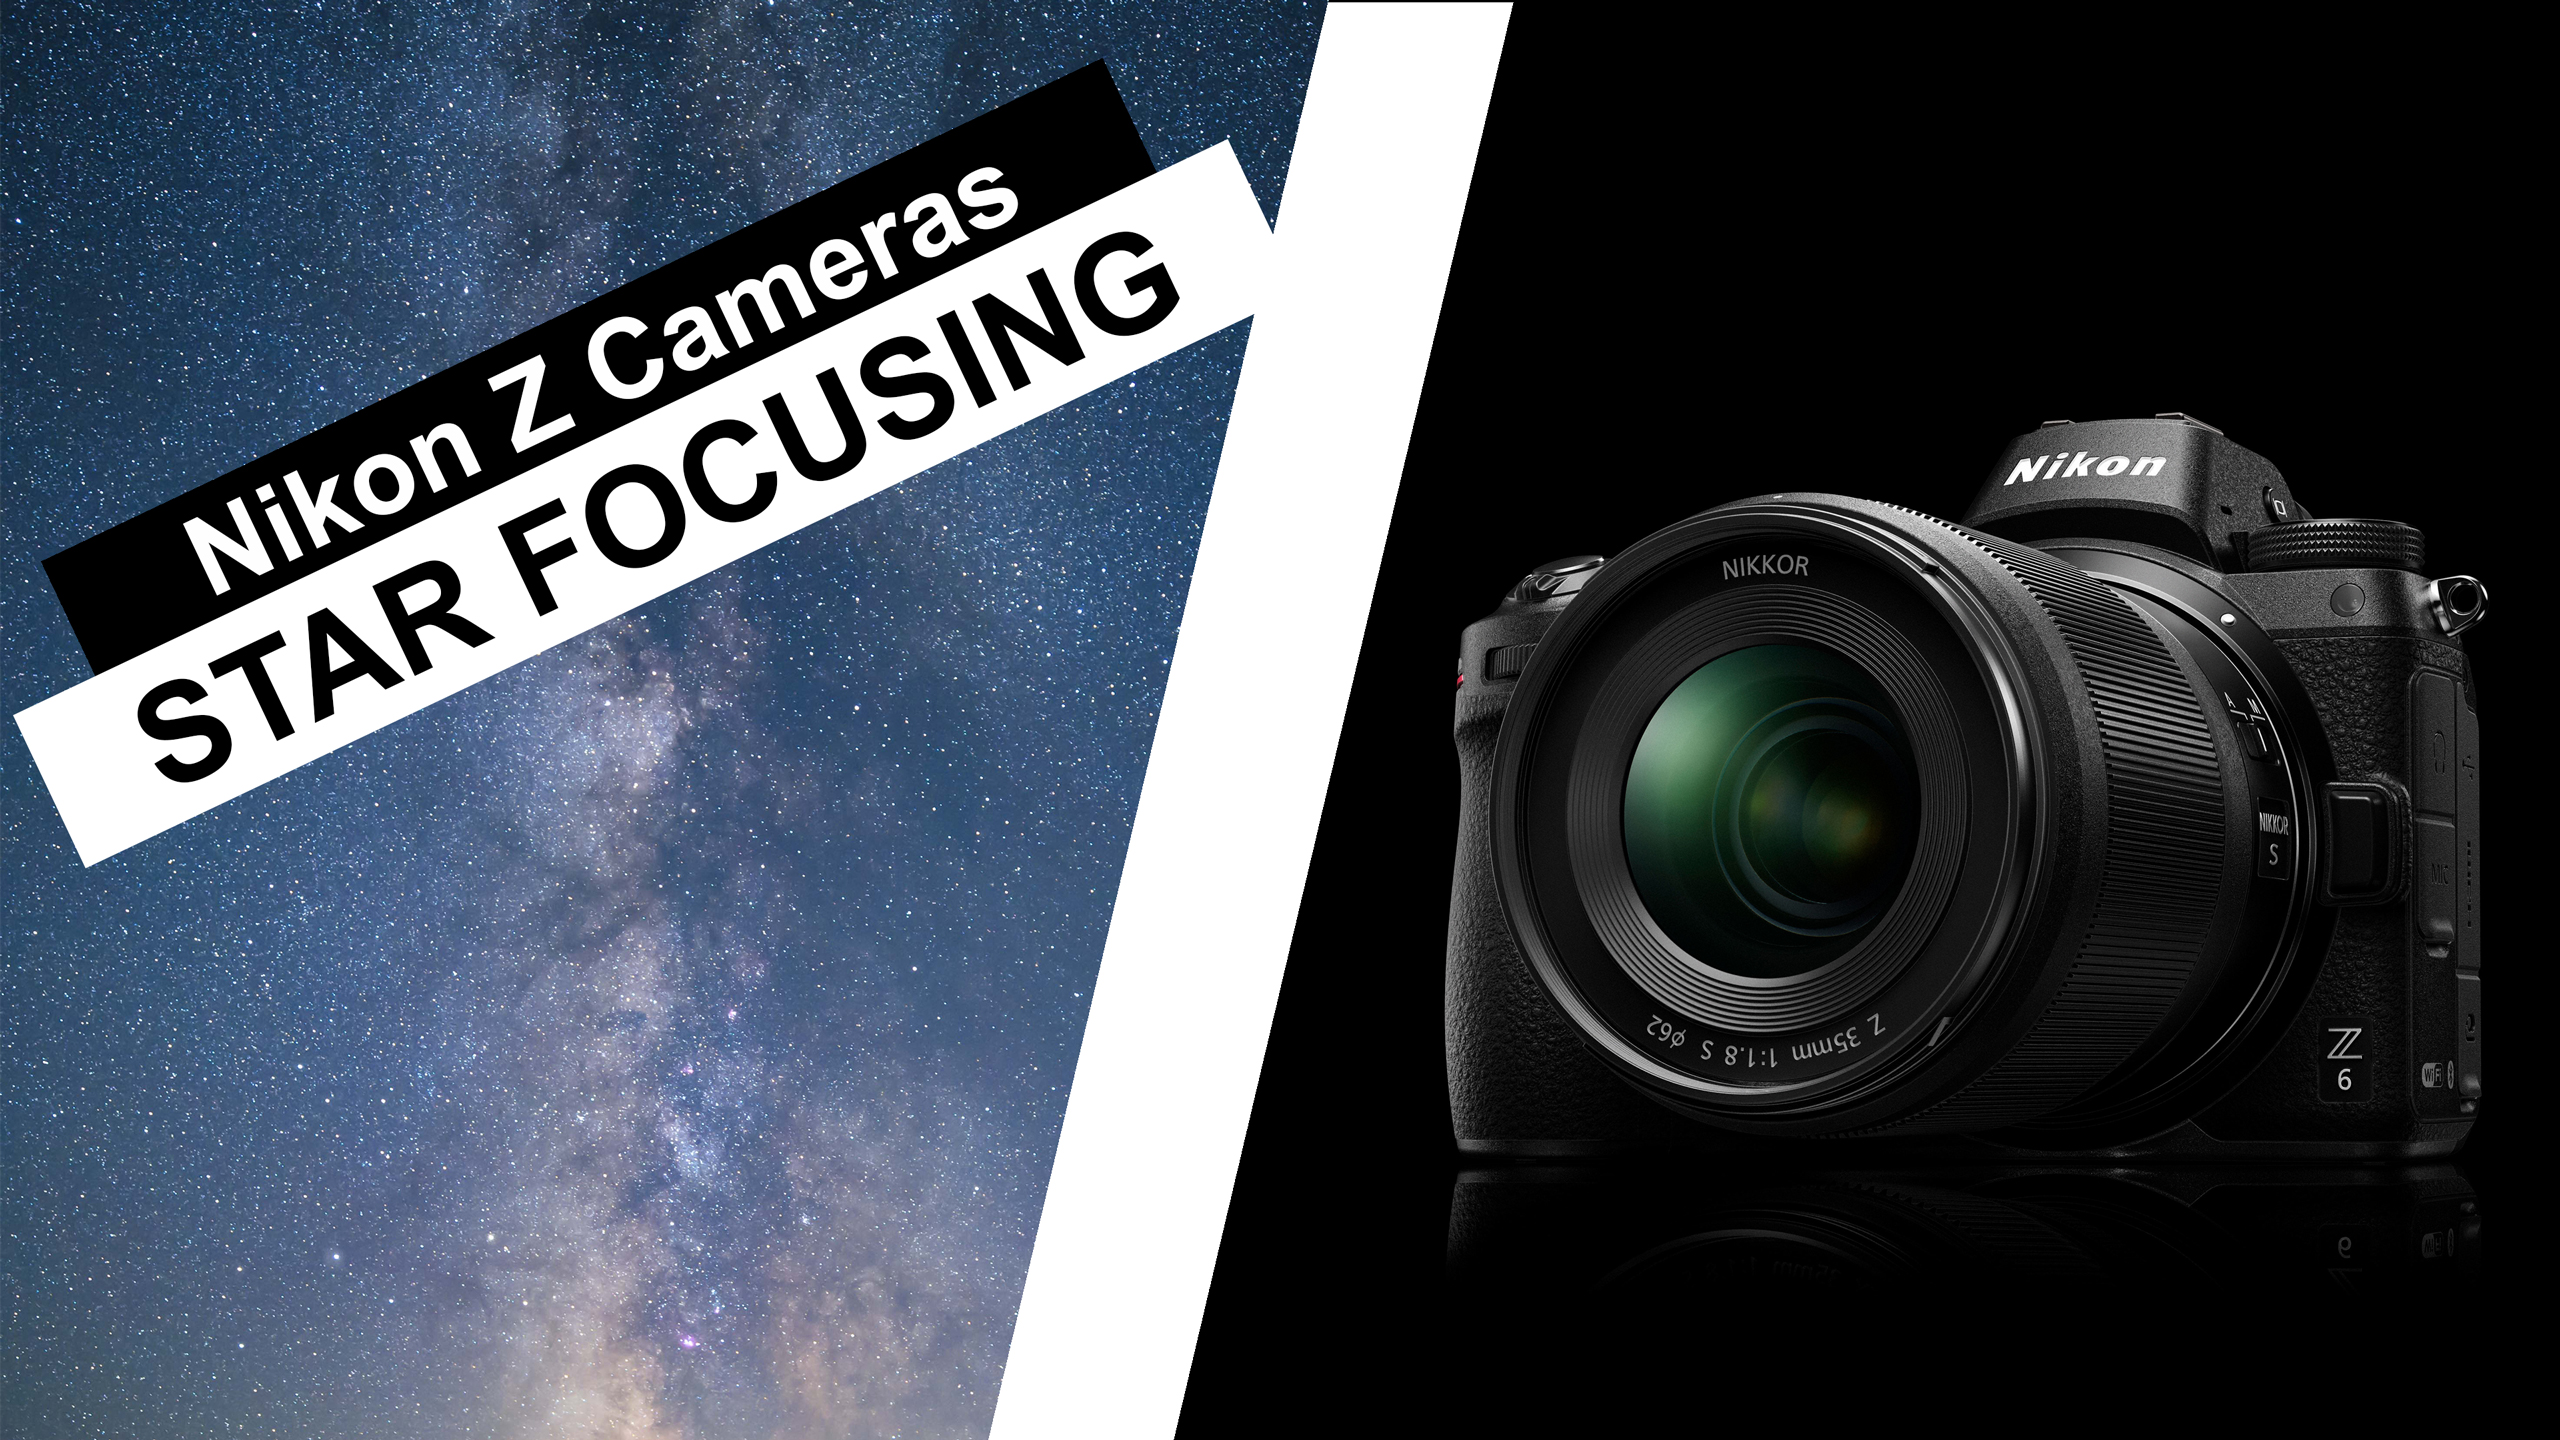 A picture of the Milky Way next to a Nikon Z6 with the text Nikon Z Cameras Star Focusing